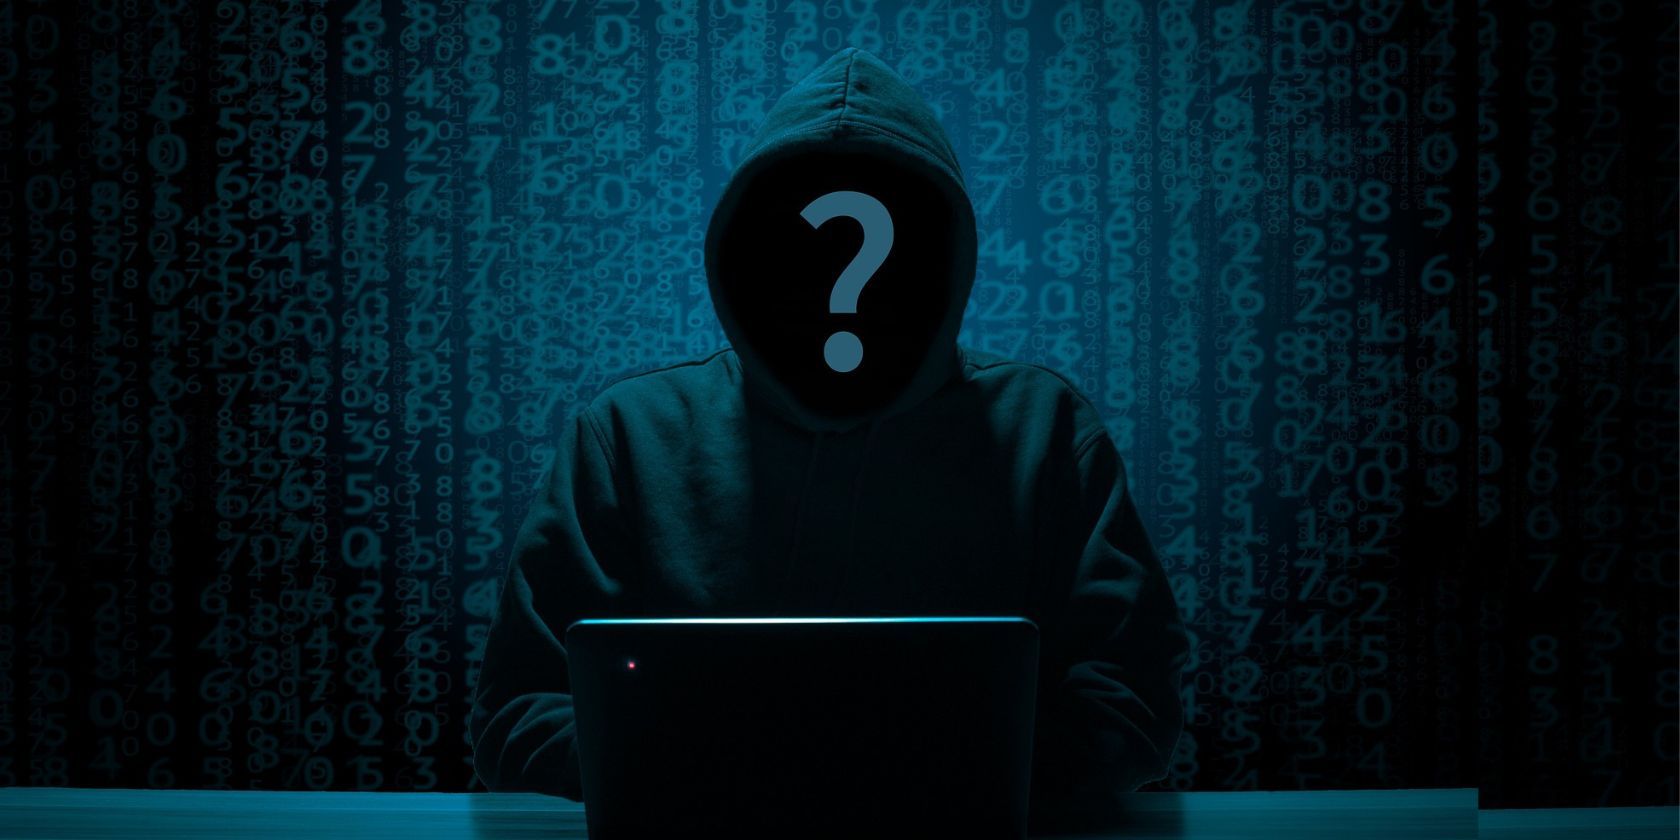 An anonymous cybercriminal, wearing a hoodie, working at a laptop. The scene is dark and the criminal facing us has a large question mark in front of their face.